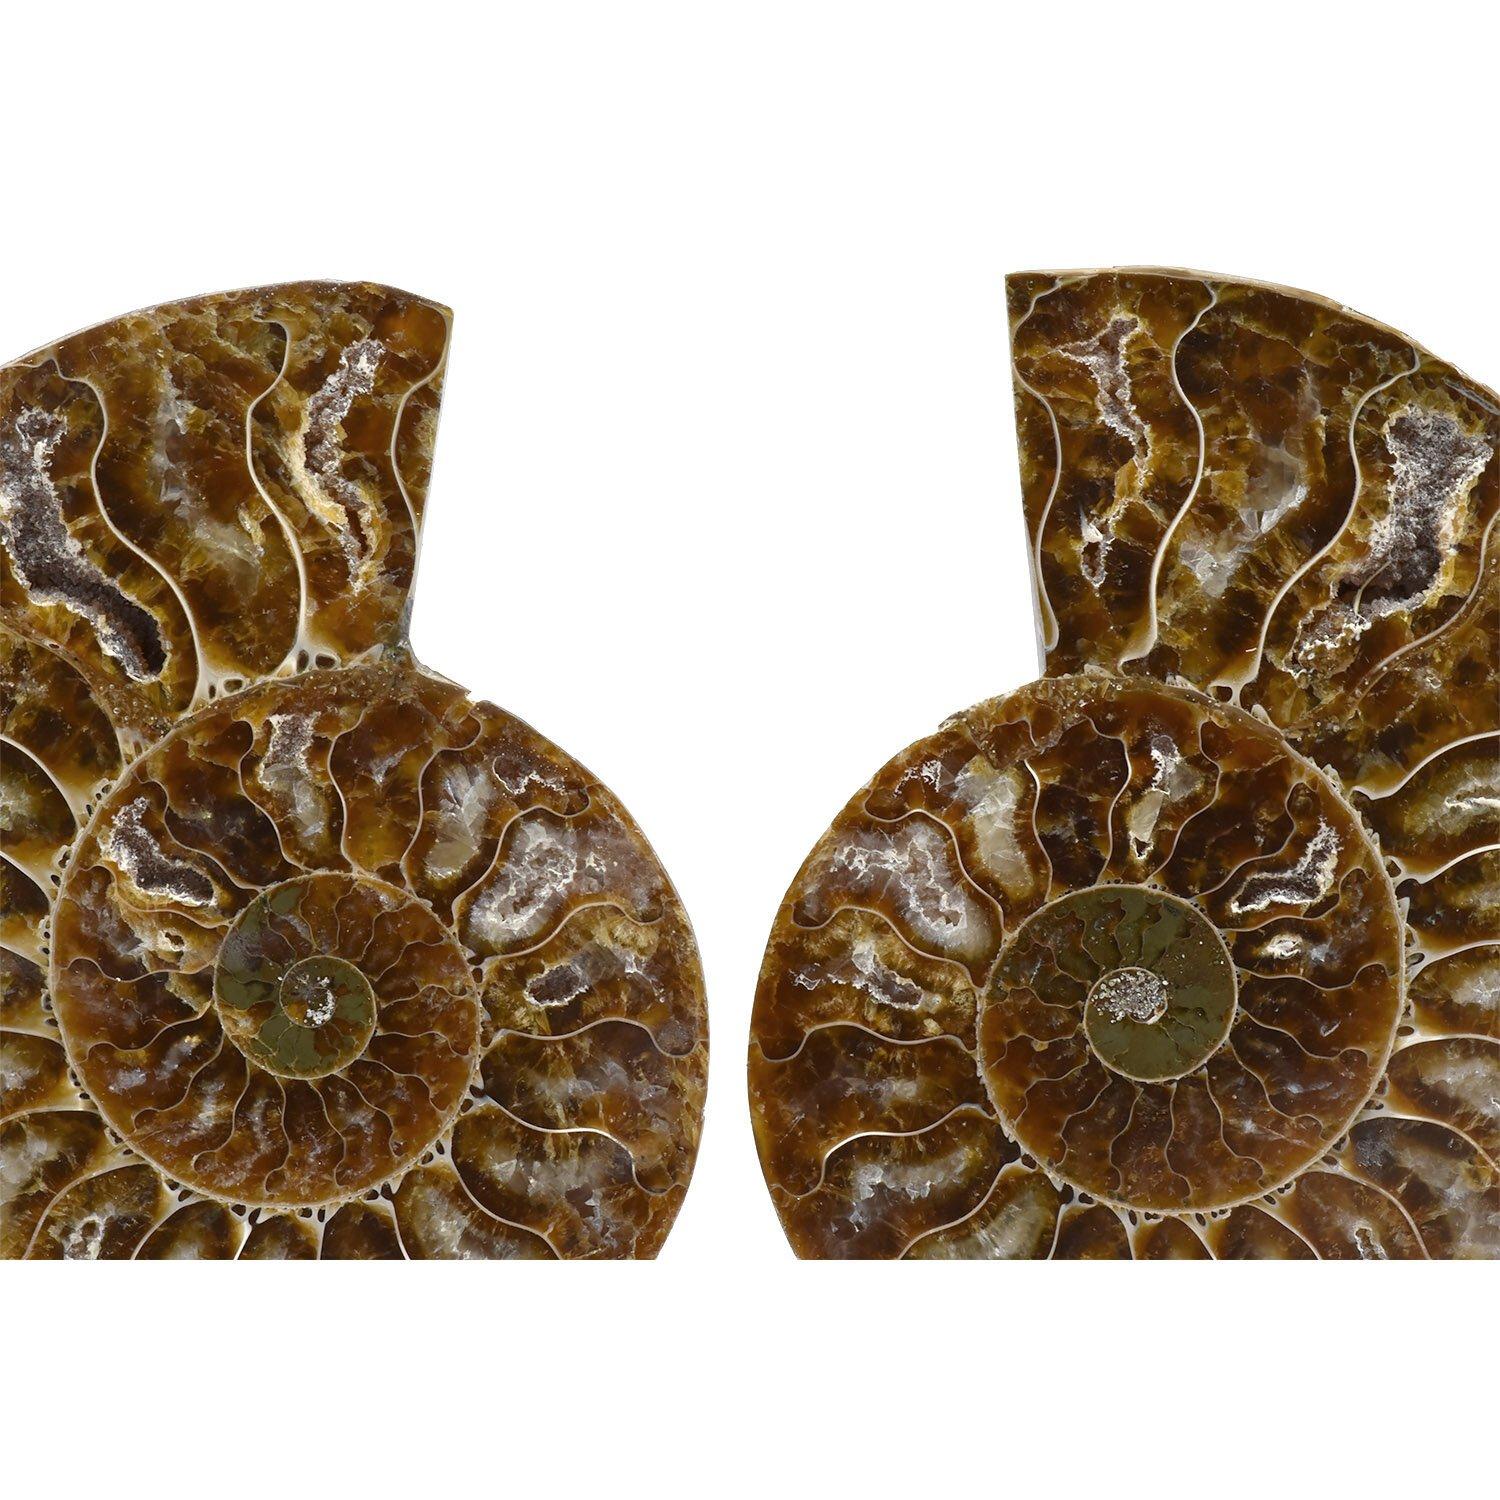 Matched Pair Split Ammonite Fossil Set Mineral Specimen In Good Condition For Sale In Point Richmond, CA